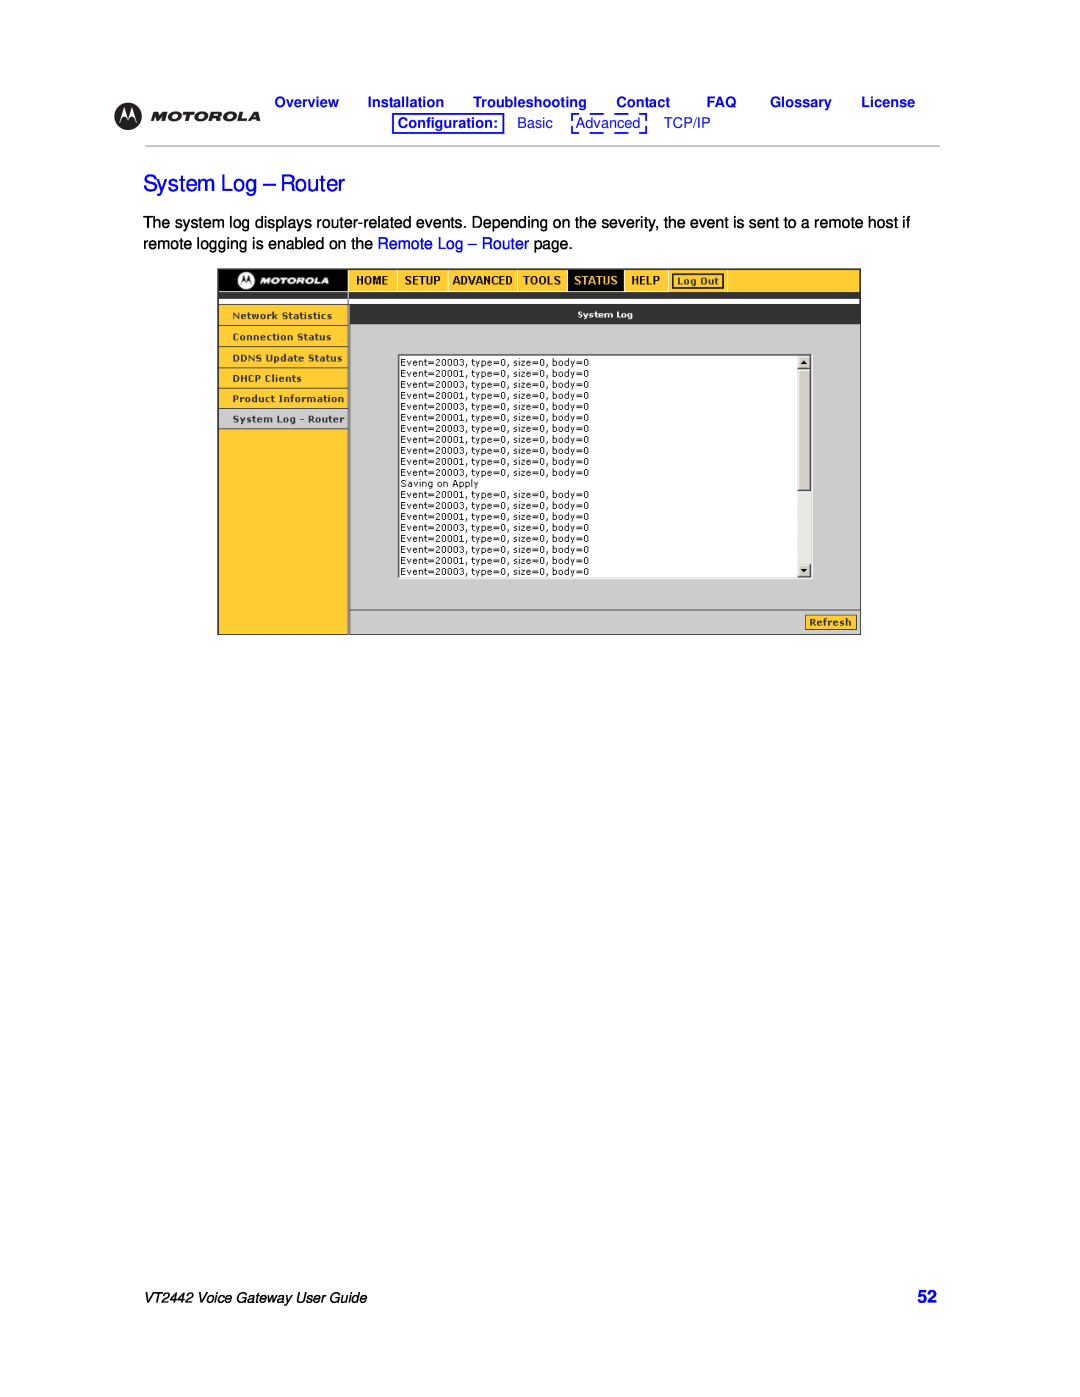 Motorola VT2442 manual System Log - Router, Overview, Installation, Contact, Glossary, License, Basic, Configuration, ce d 